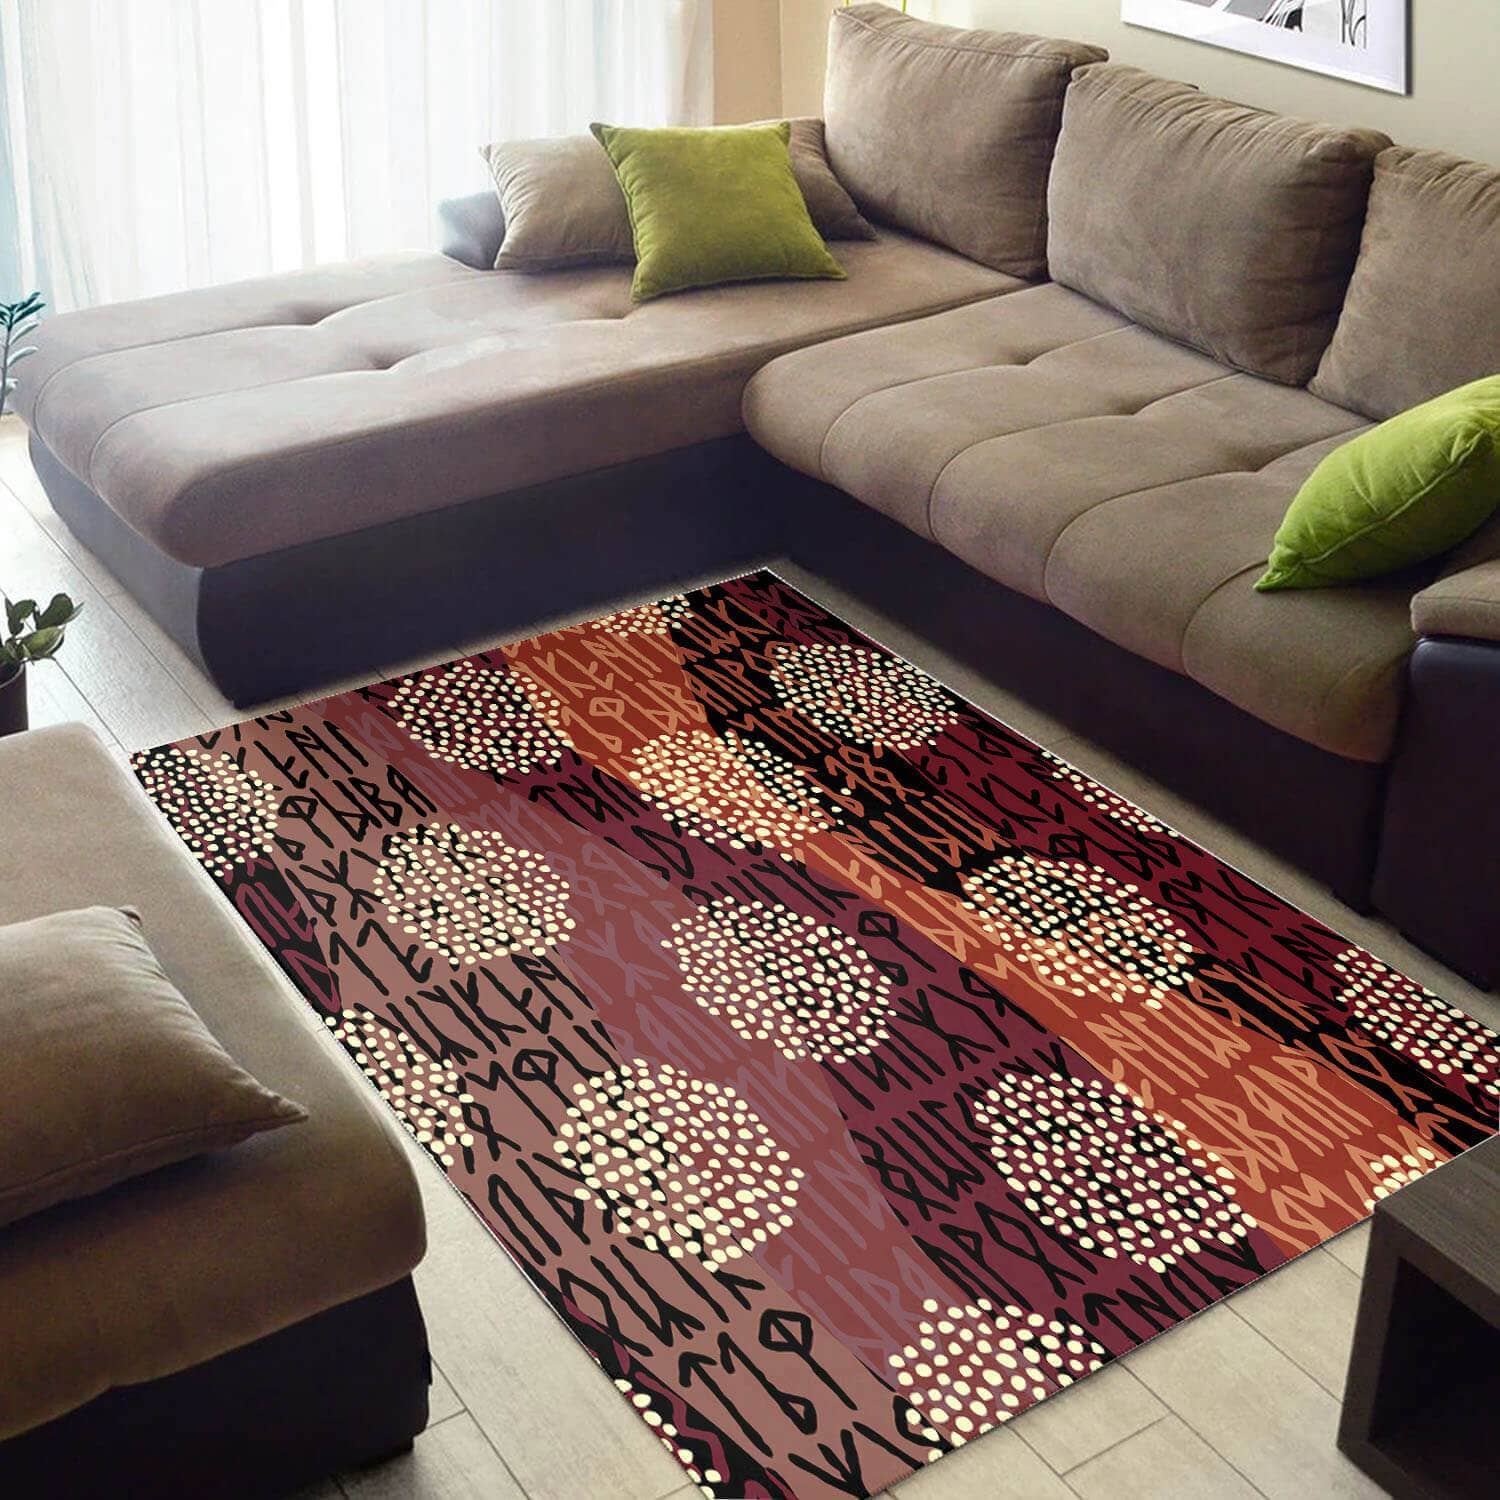 Nice African Adorable Black History Month Afrocentric Pattern Art Style Carpet Living Room Rug